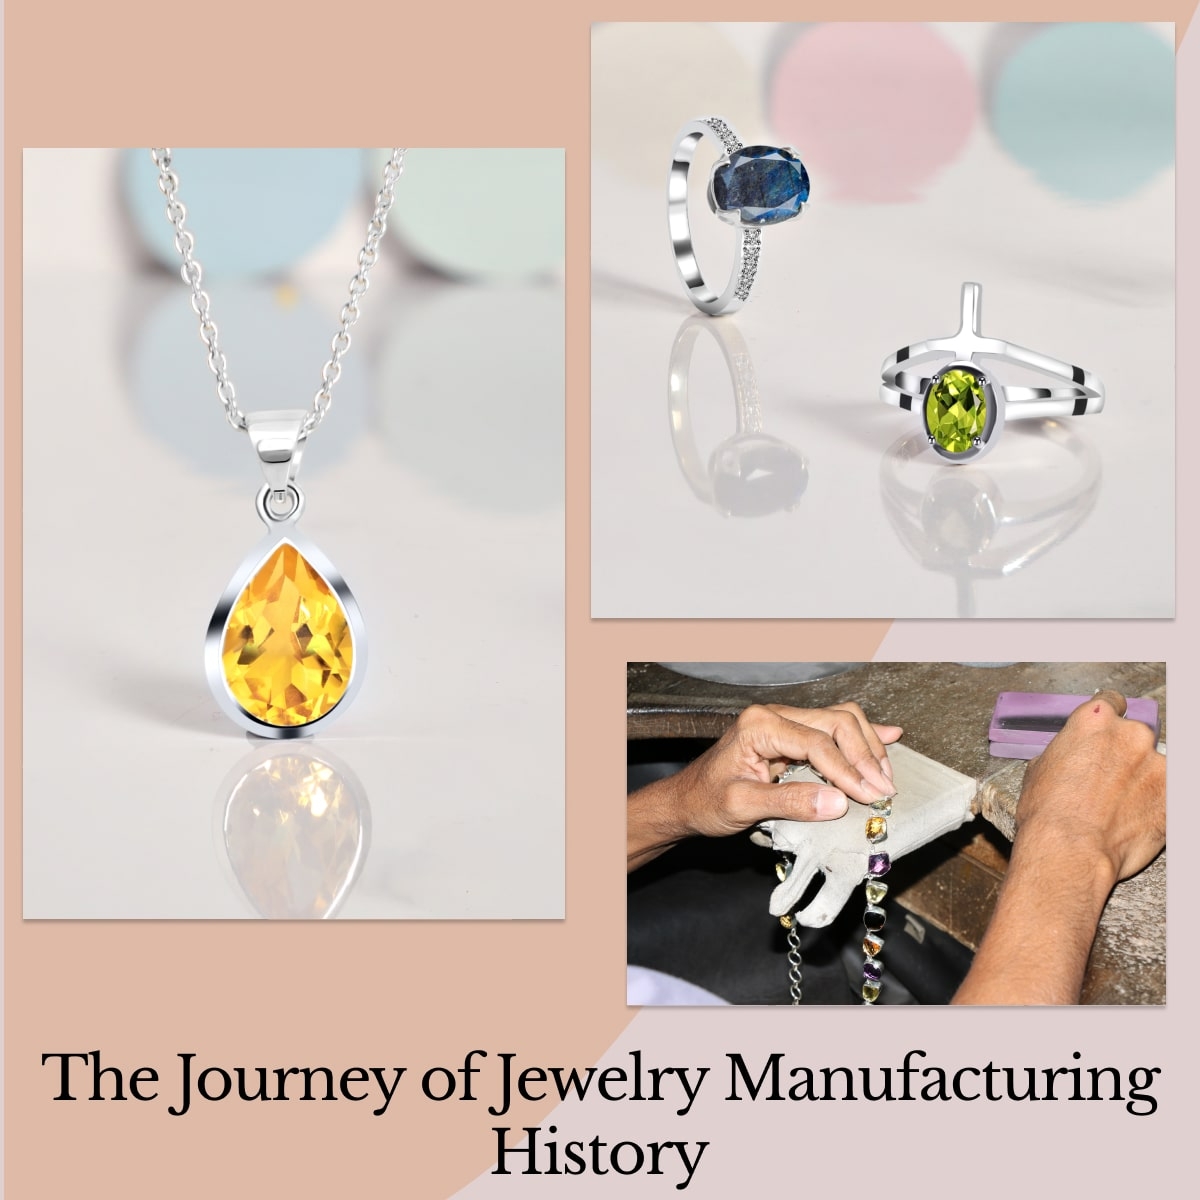 The History of Jewelry Manufacturing